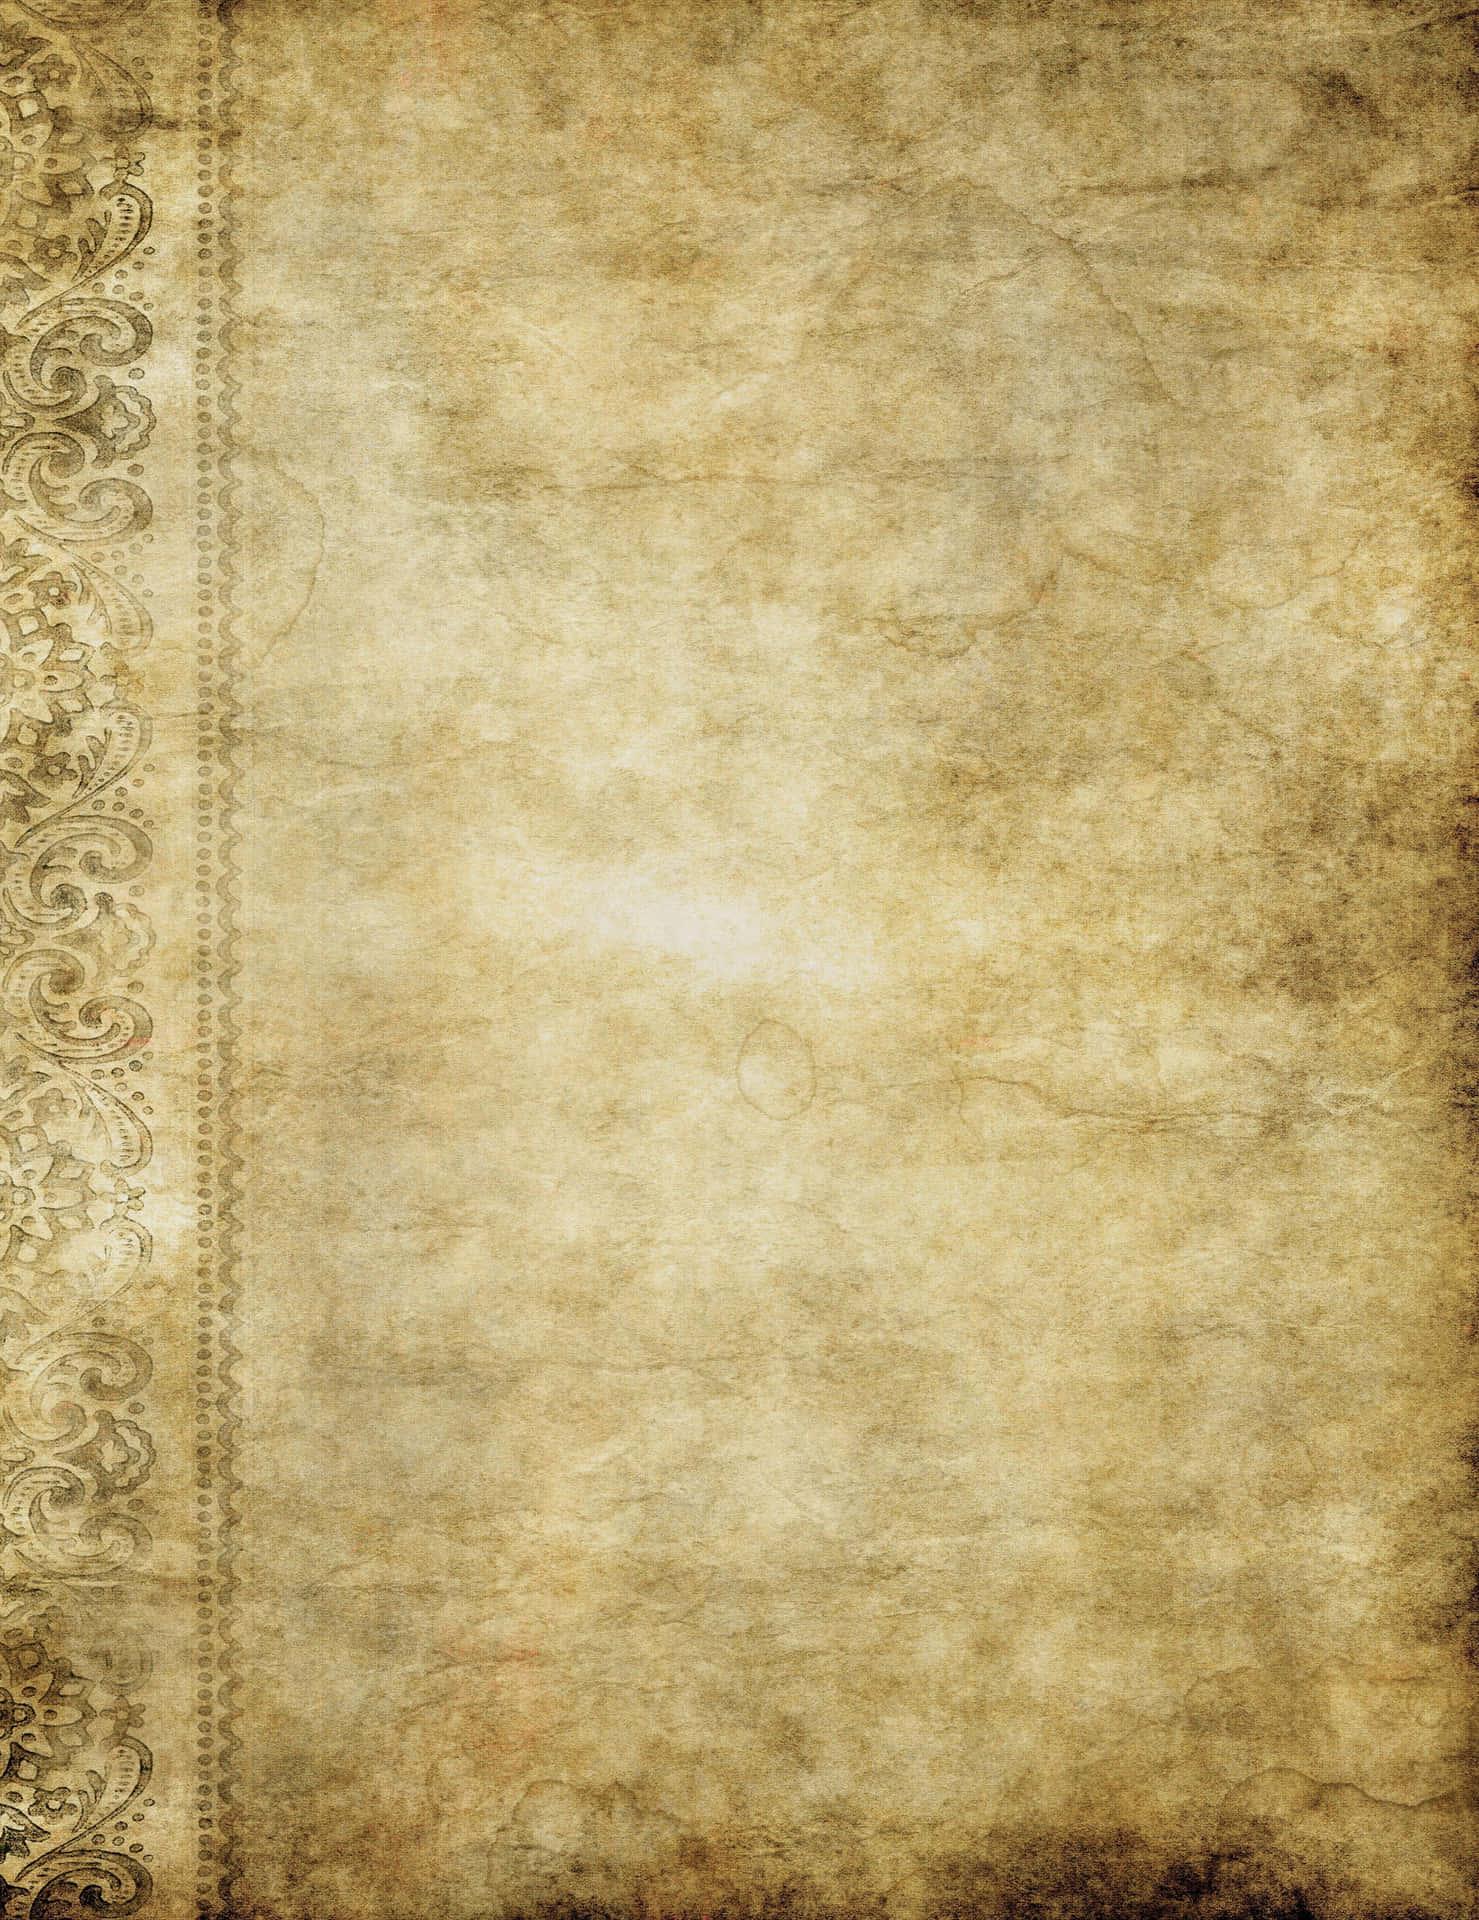 Old Paper Texture With Ornate Border Picture